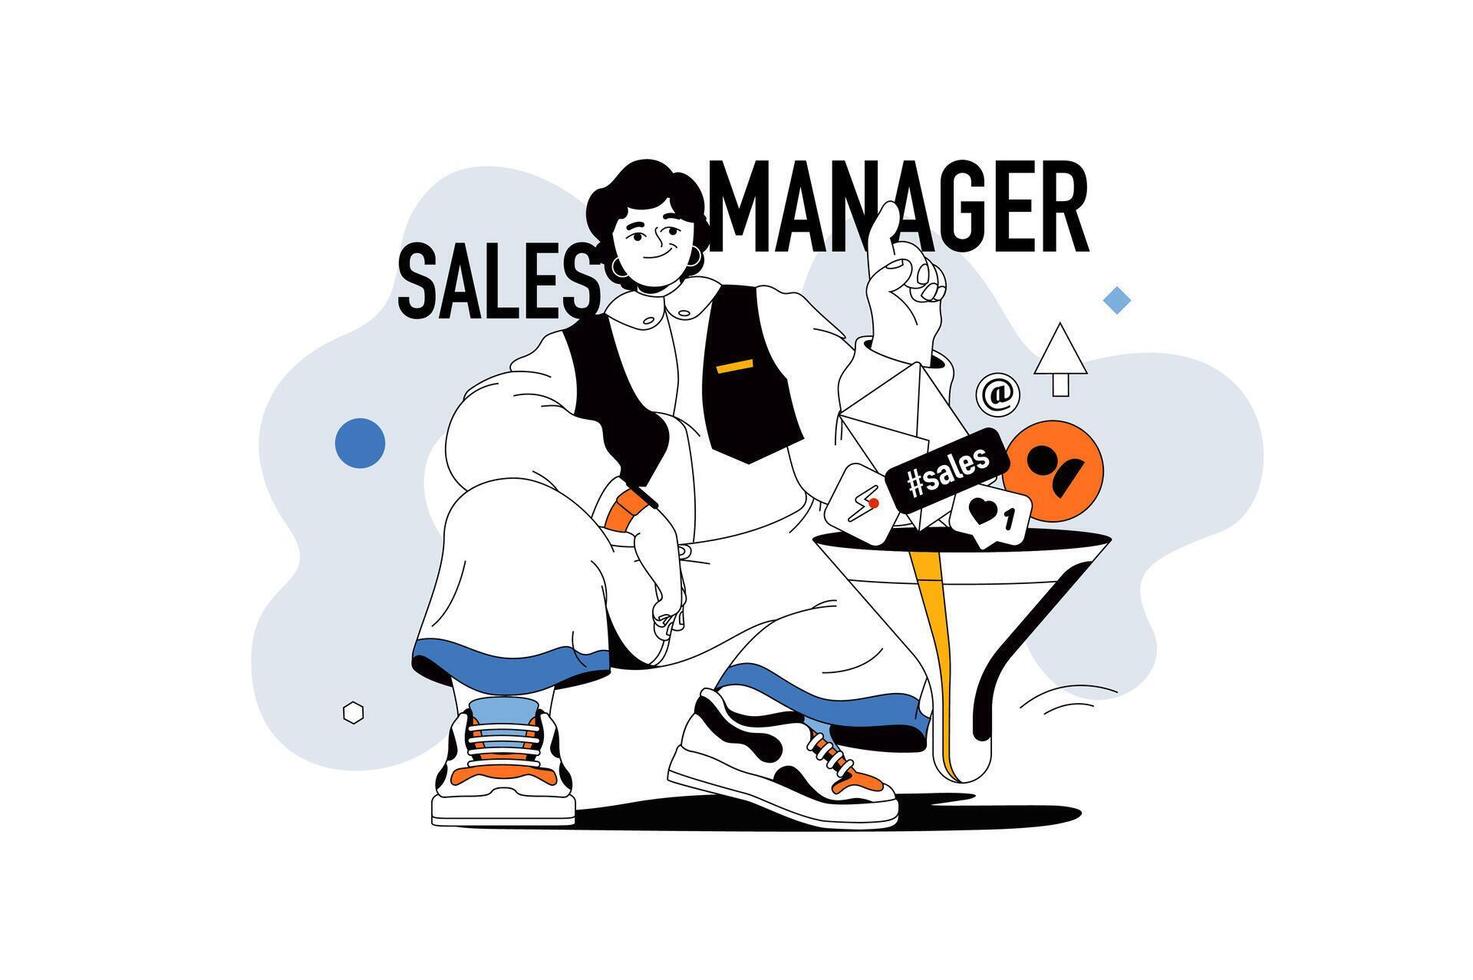 Sales manager concept with people scene in flat line design for web. Man uses marketing tools for increase profit and online promotion. Vector illustration for social media banner, marketing material.